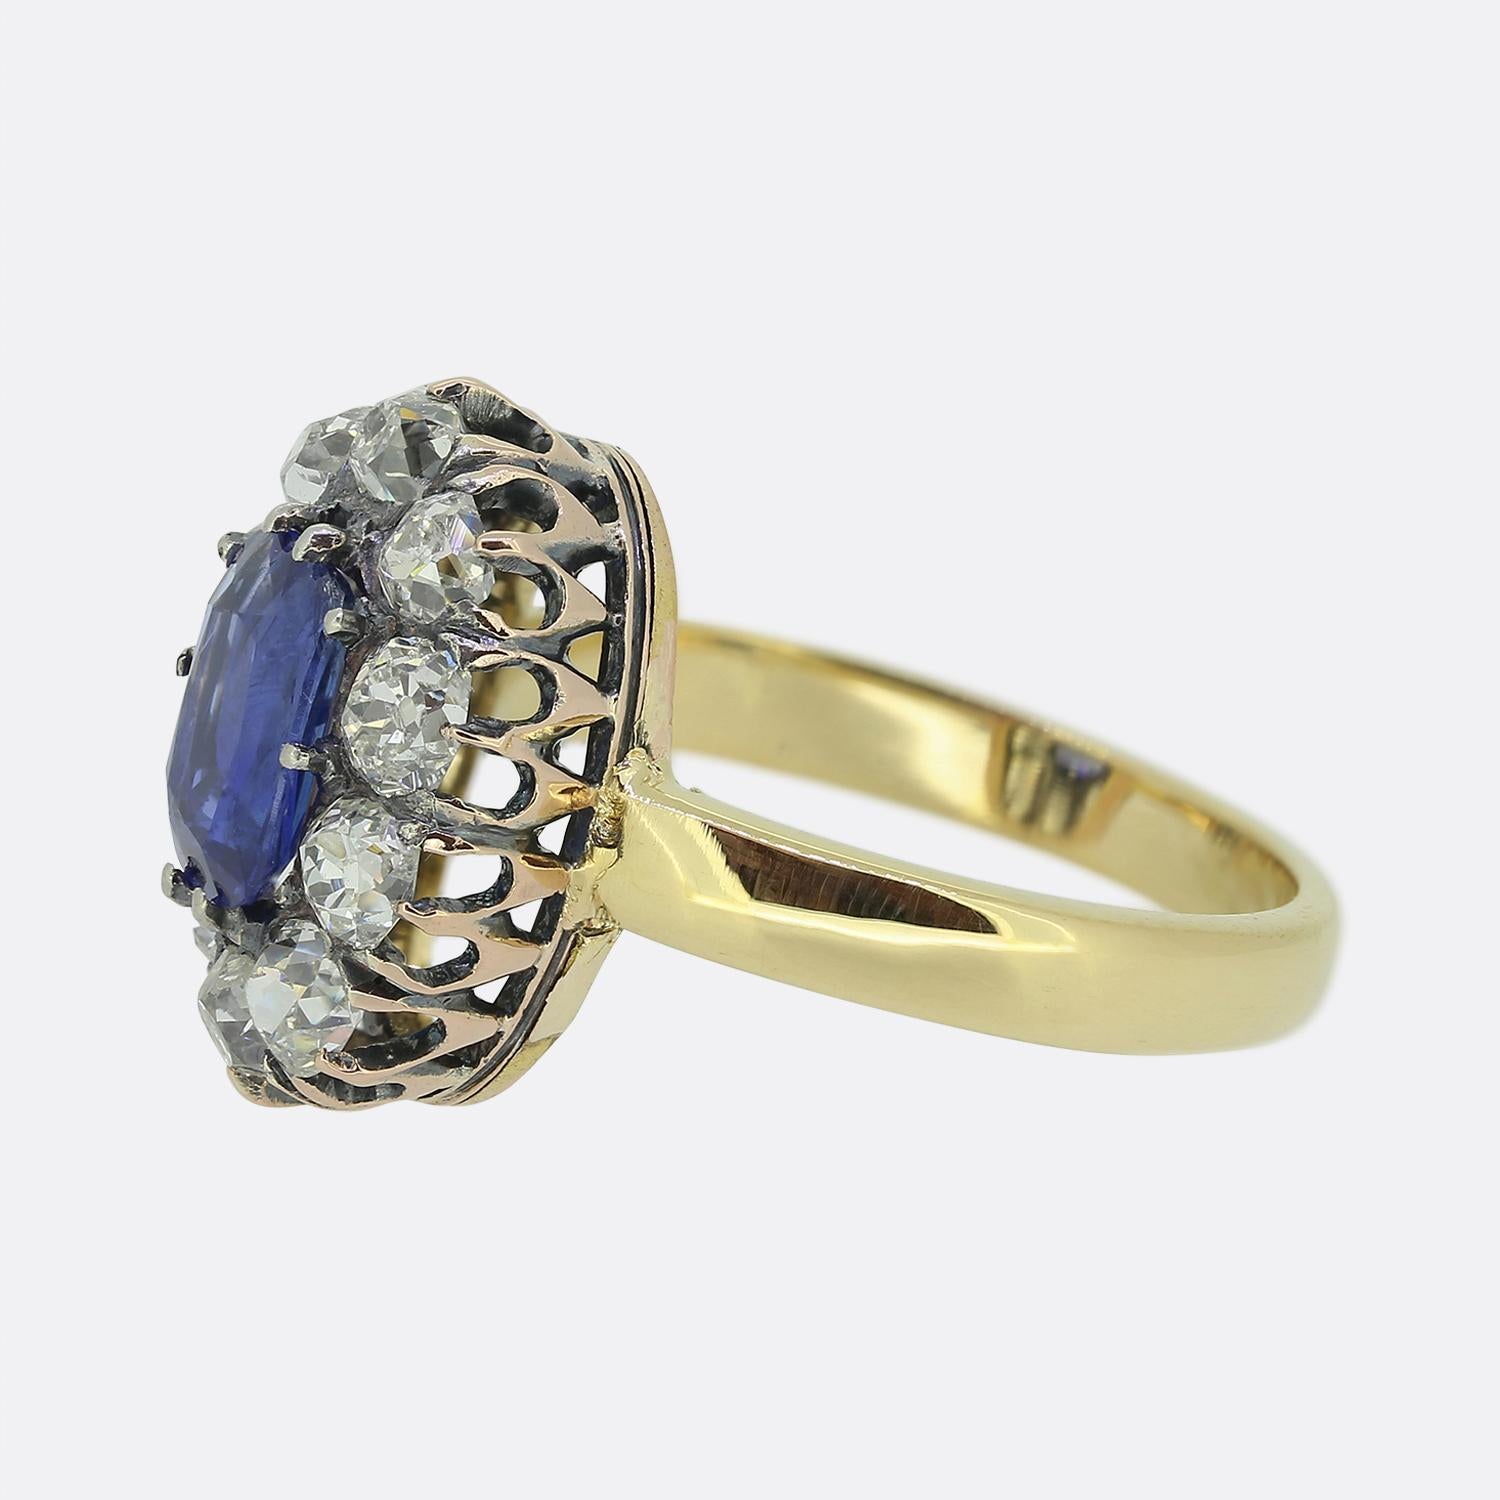 Here we have a stunning sapphire and diamond cluster ring. This antique piece features an single oval shaped cushion cut natural unheated sapphire at the centre of the face possessing a bright cornflower blue colour tone. This principle stone is